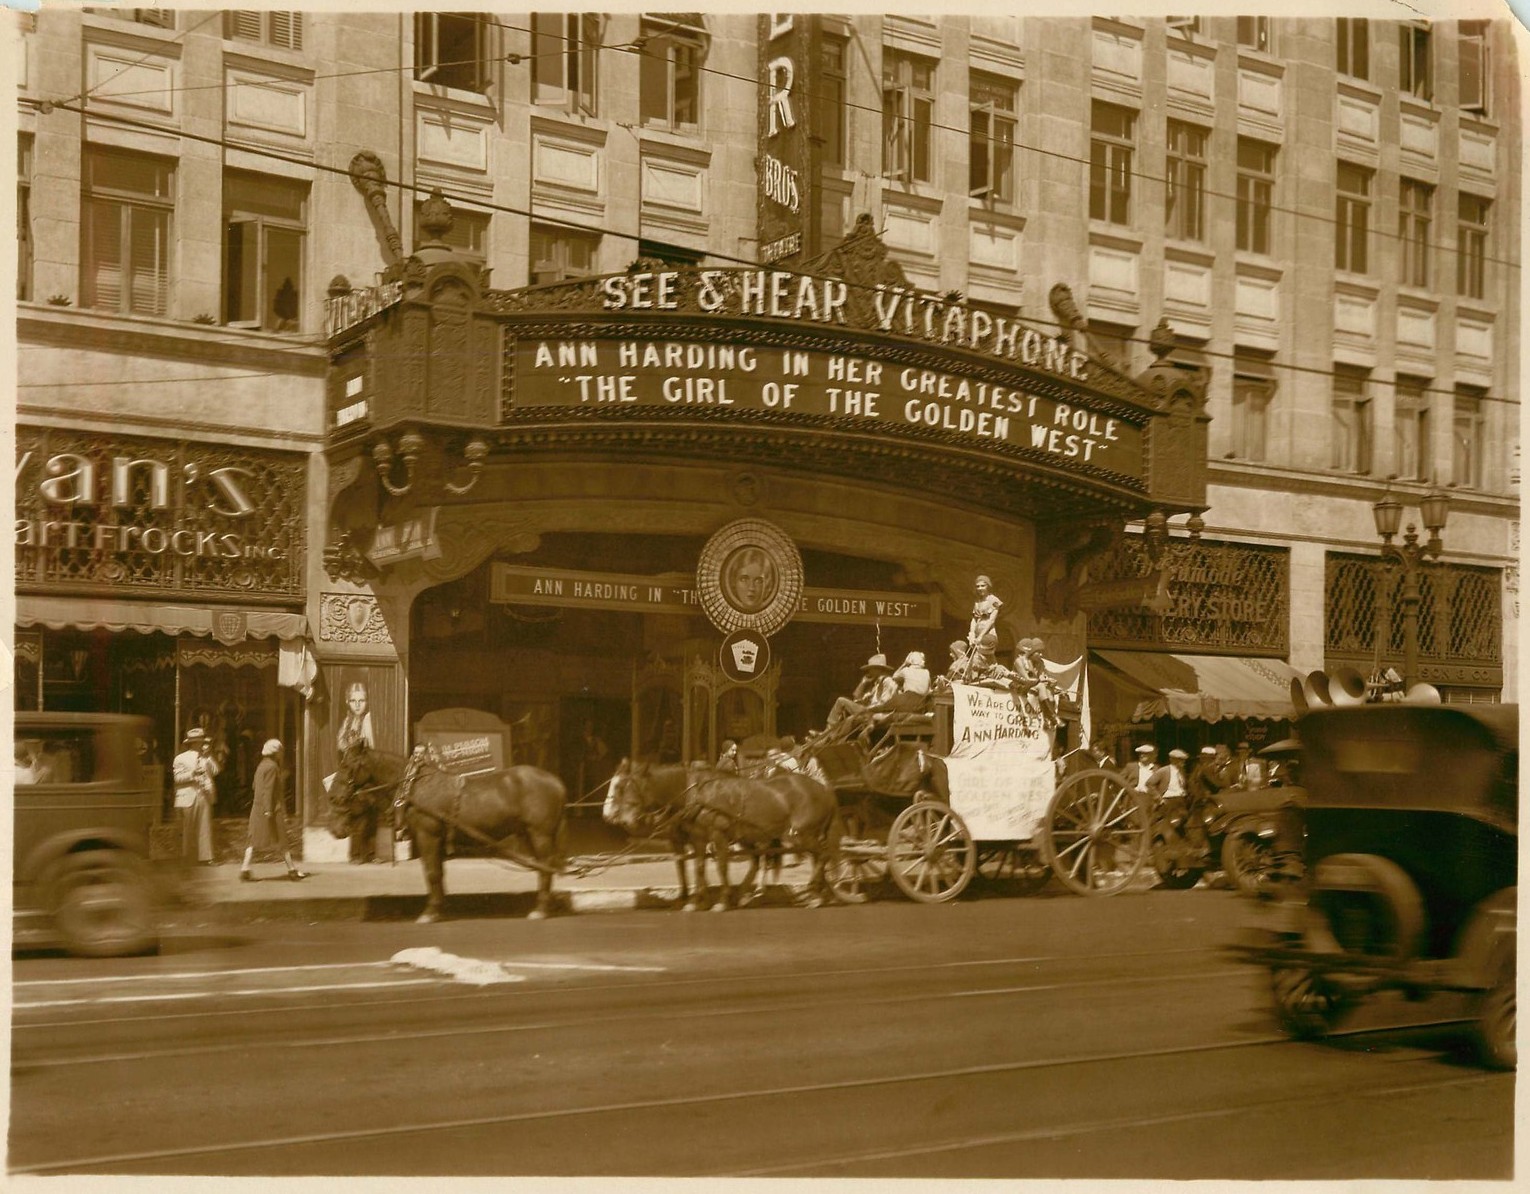 The lobby of the Warner Brothers Hollywood Theatre showing the revolving roulette wheel and stage coach used to exploit GIRL OF THE GOLDEN WEST